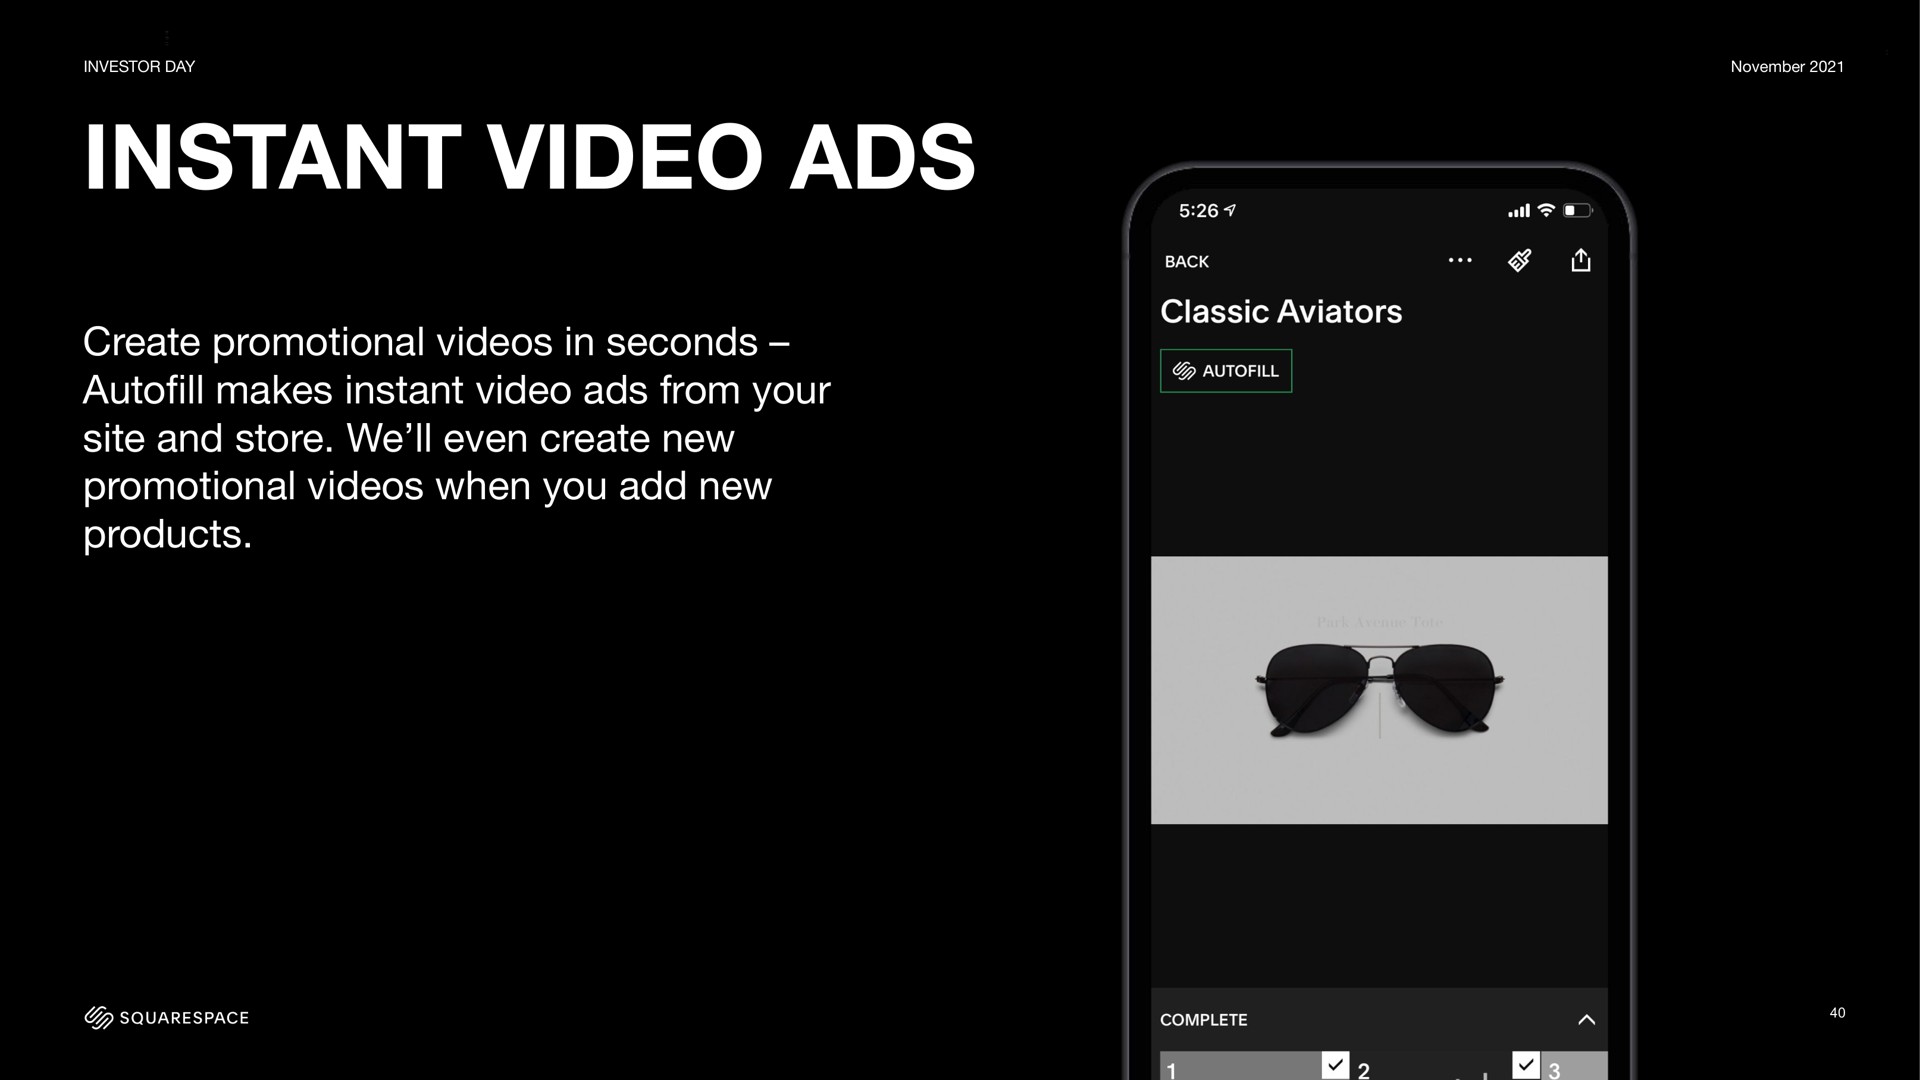 instant video ads create promotional videos in seconds auto makes instant video ads from your site and store we even create new promotional videos when you add new products | Squarespace